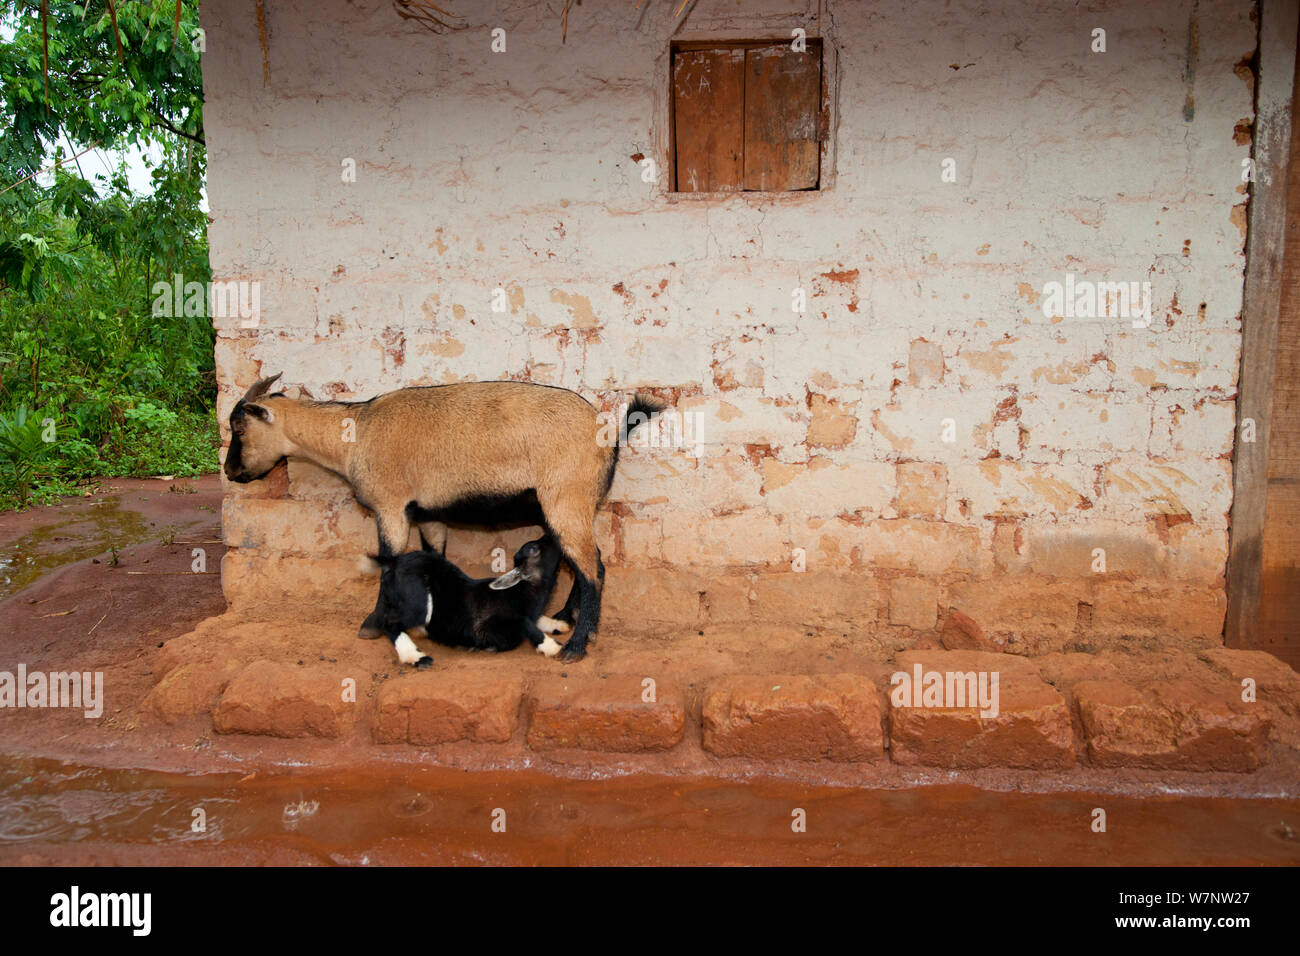 African domestic goat female with suckling kid, sheltering under the eves of a village house in wet season, Boukoko village, Central African Republic Stock Photo